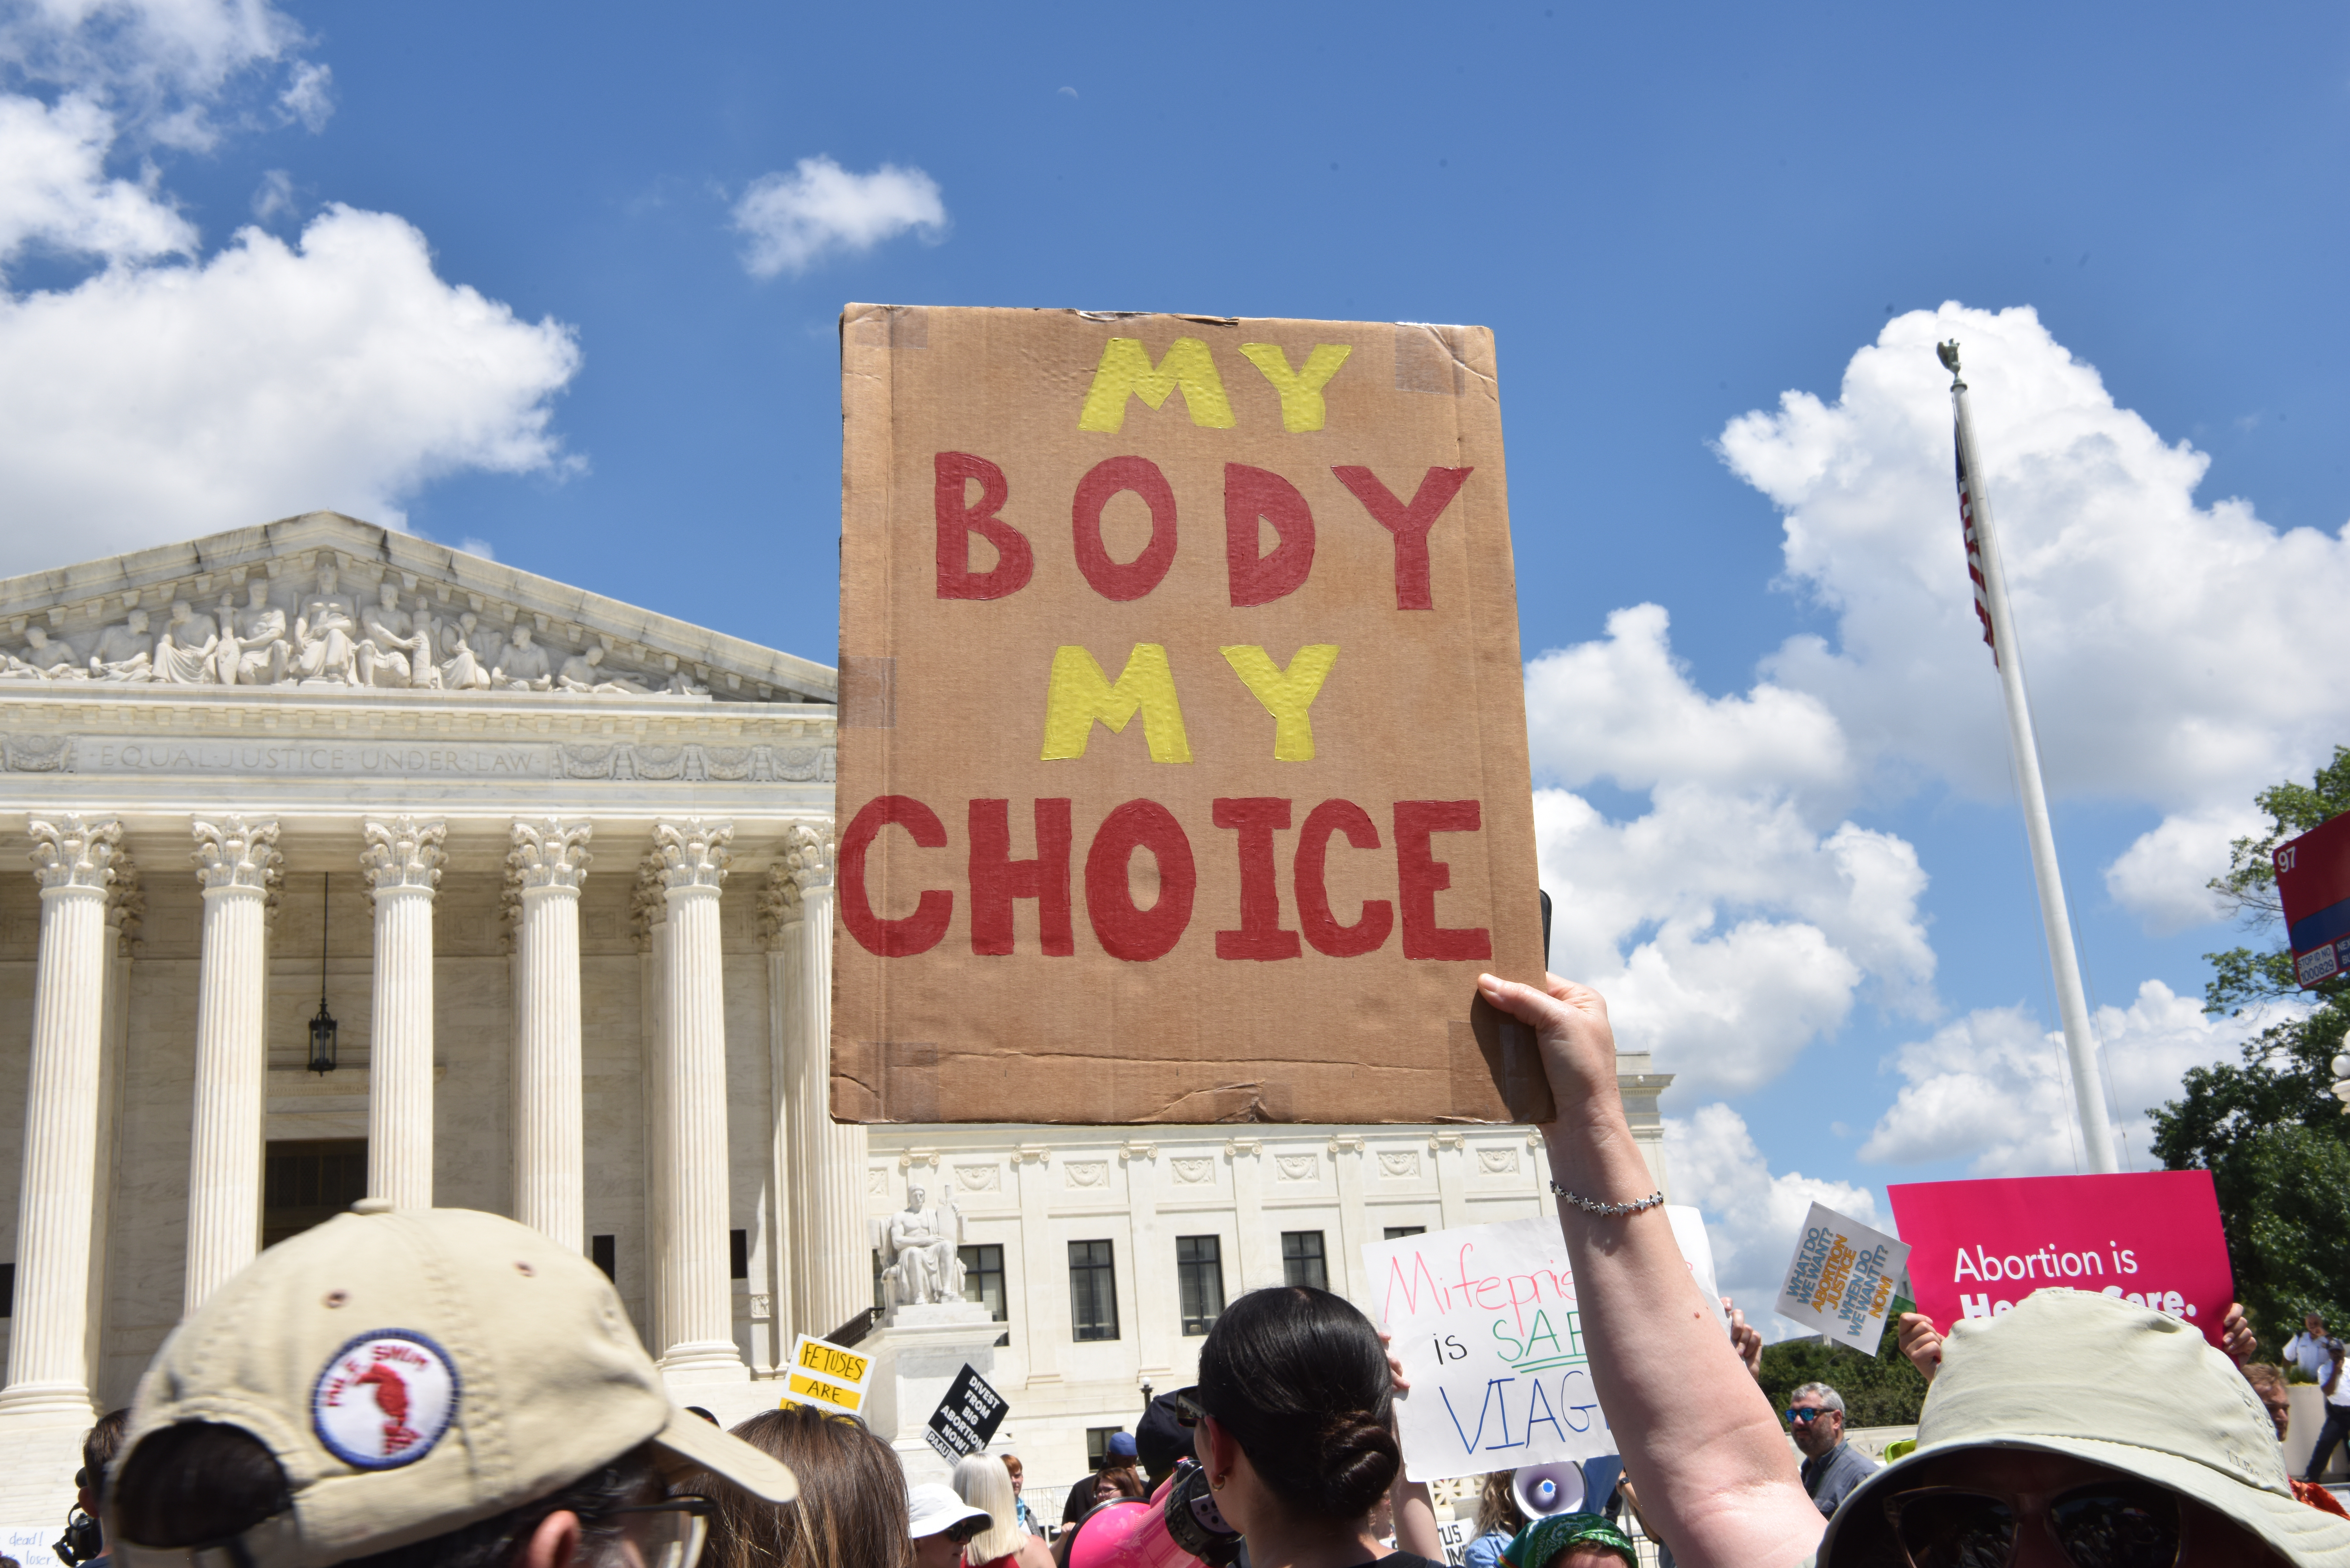 A crowd gathers in front of the Supreme Court building, with its white columns and portico. They are seen from behind and hold signs including “My body, my choice.”